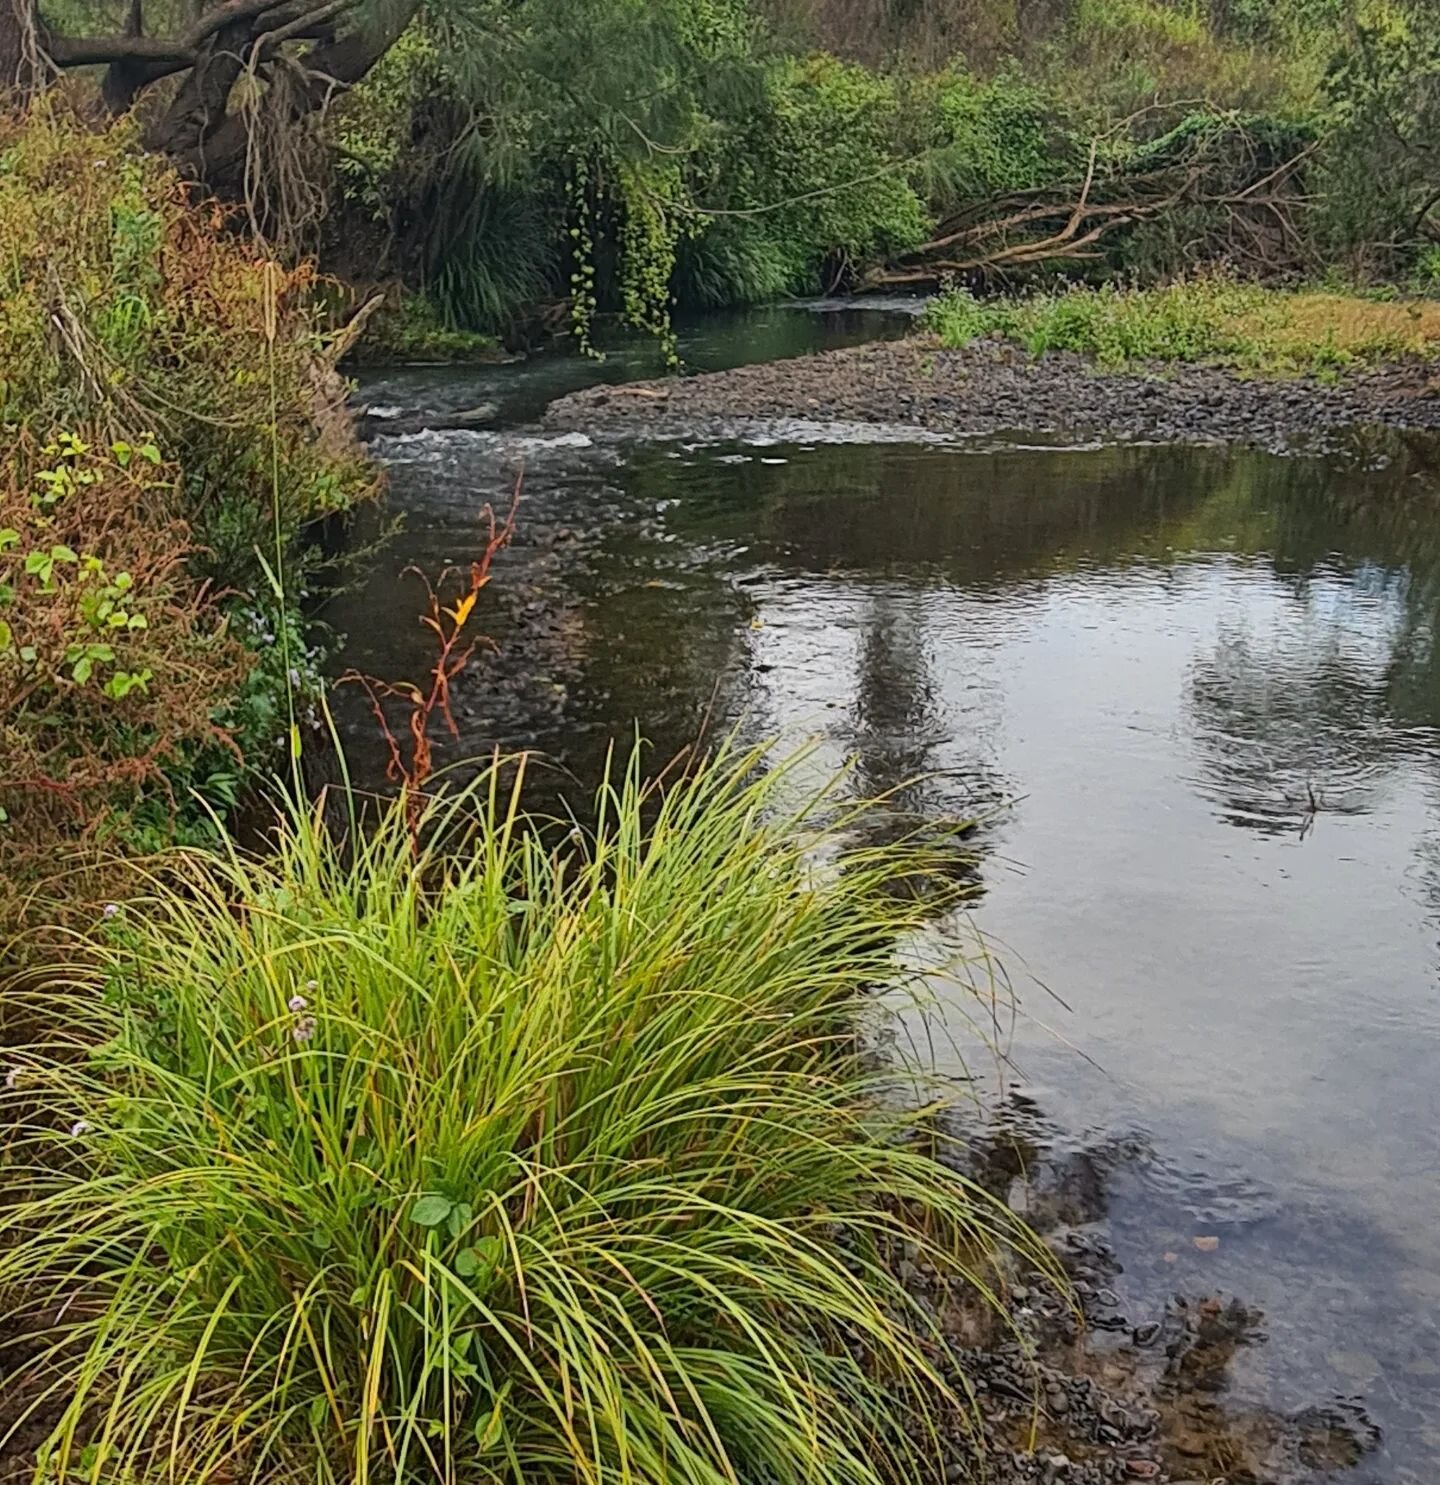 Today we are BALUUN YARNING at EDEN CREEK HALL 

Saturday 13th until 4pm - come join us!

Listen to and speak with river experts and passionate locals. Share your stories, experiences and hopes for the river. An opportunity to bring your voice to an 